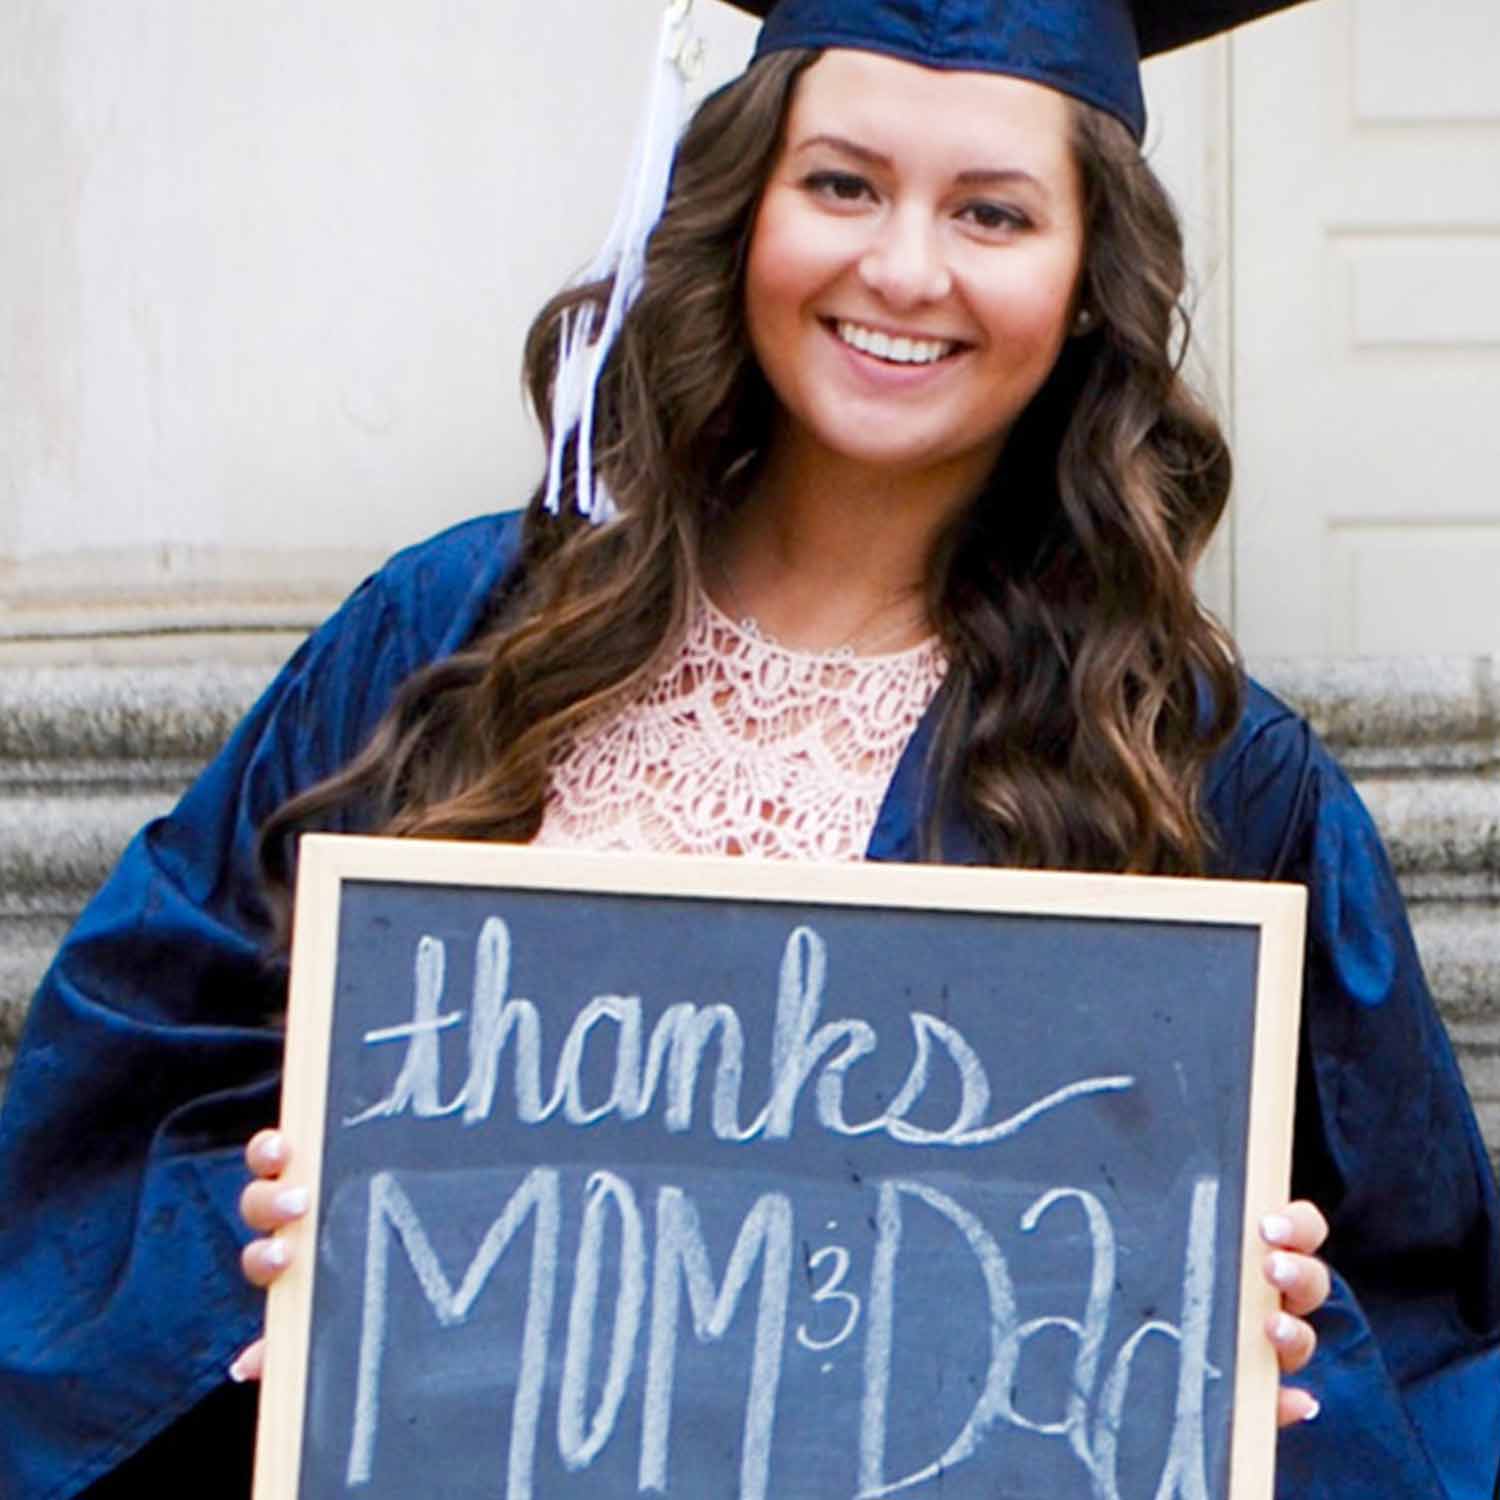 A  female graduate holding up a sign thanking her mom and dad.